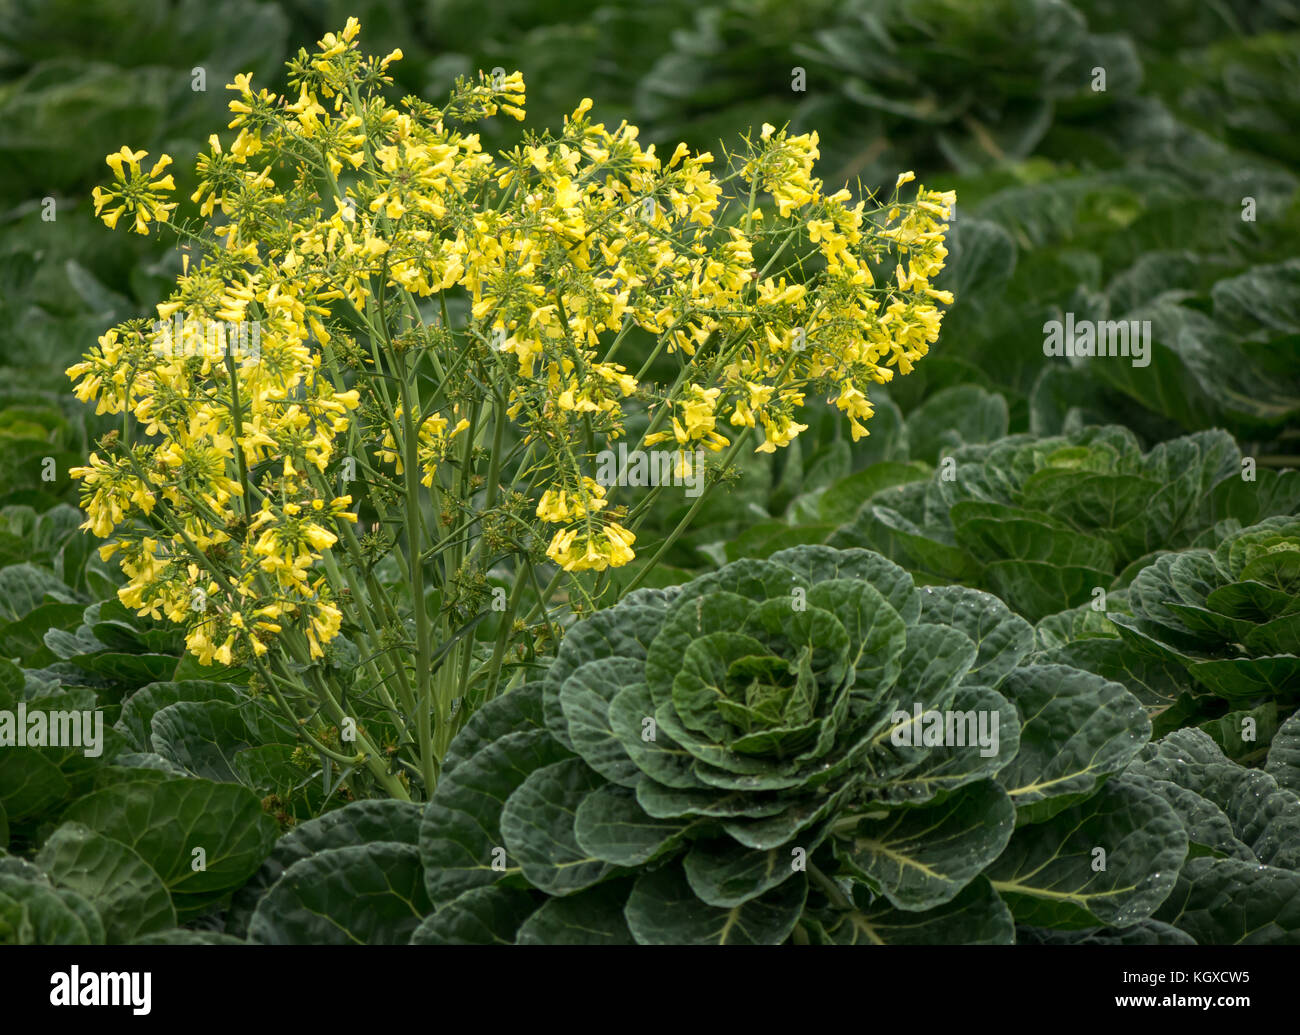 Close up of Brussels Sprout plant, Brassica oleracea, growing in crop field with yellow flowering weed, East Lothian, Scotland, UK Stock Photo